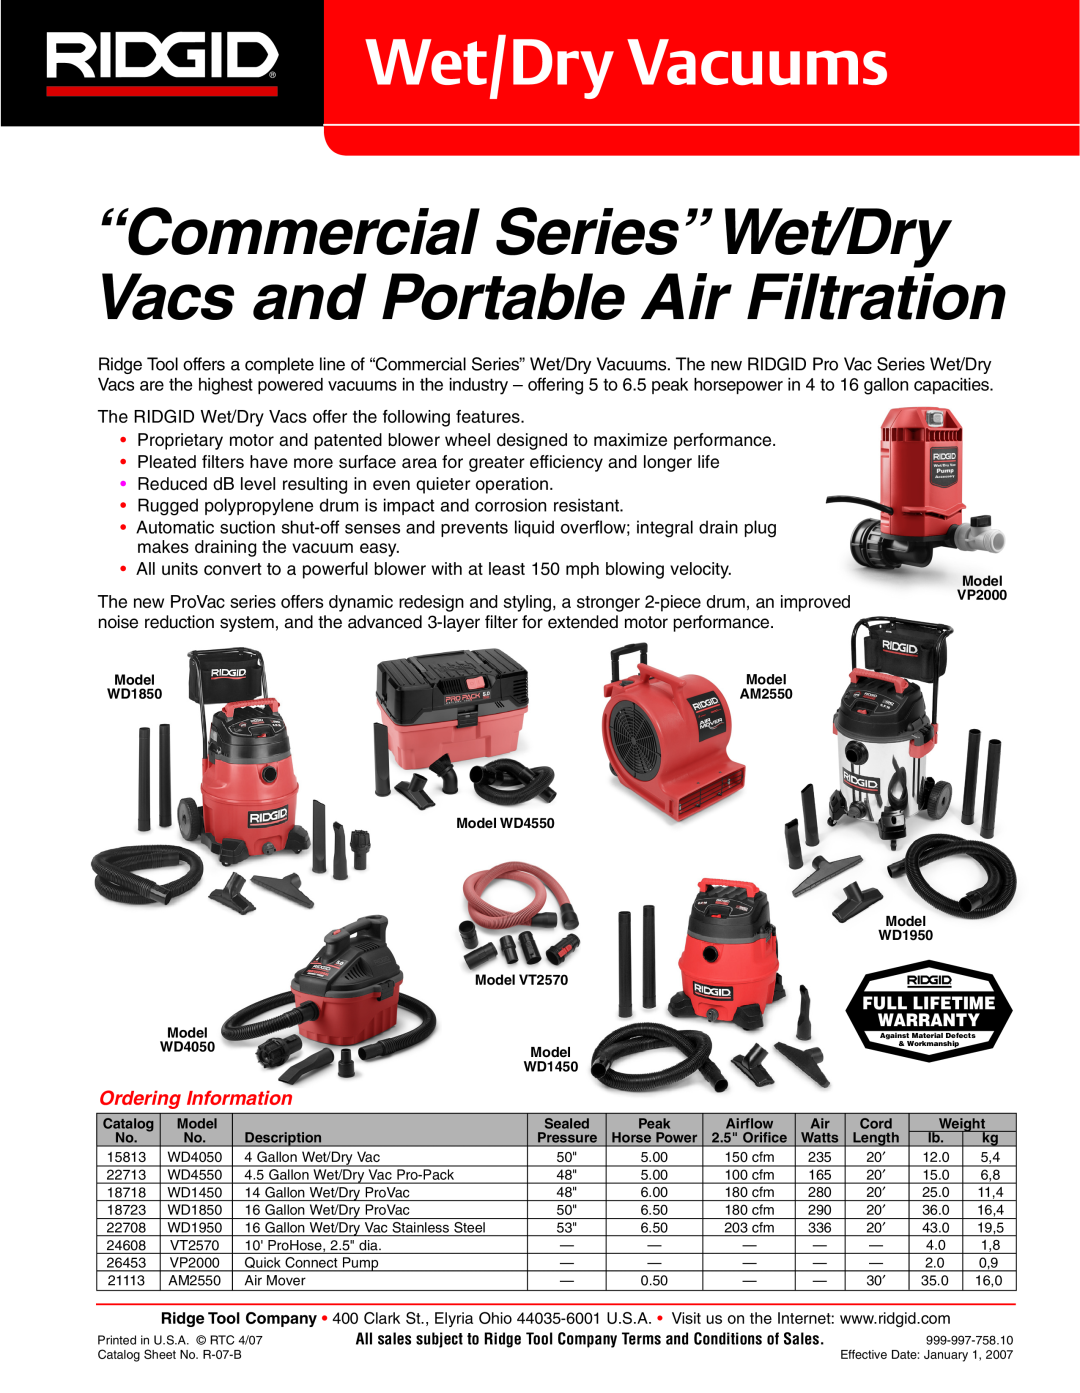 RIDGID WD4550 warranty Wet/Dry Vacuums, “Commercial Series”Wet/Dry Vacs and Portable Air Filtration, Ordering Information 